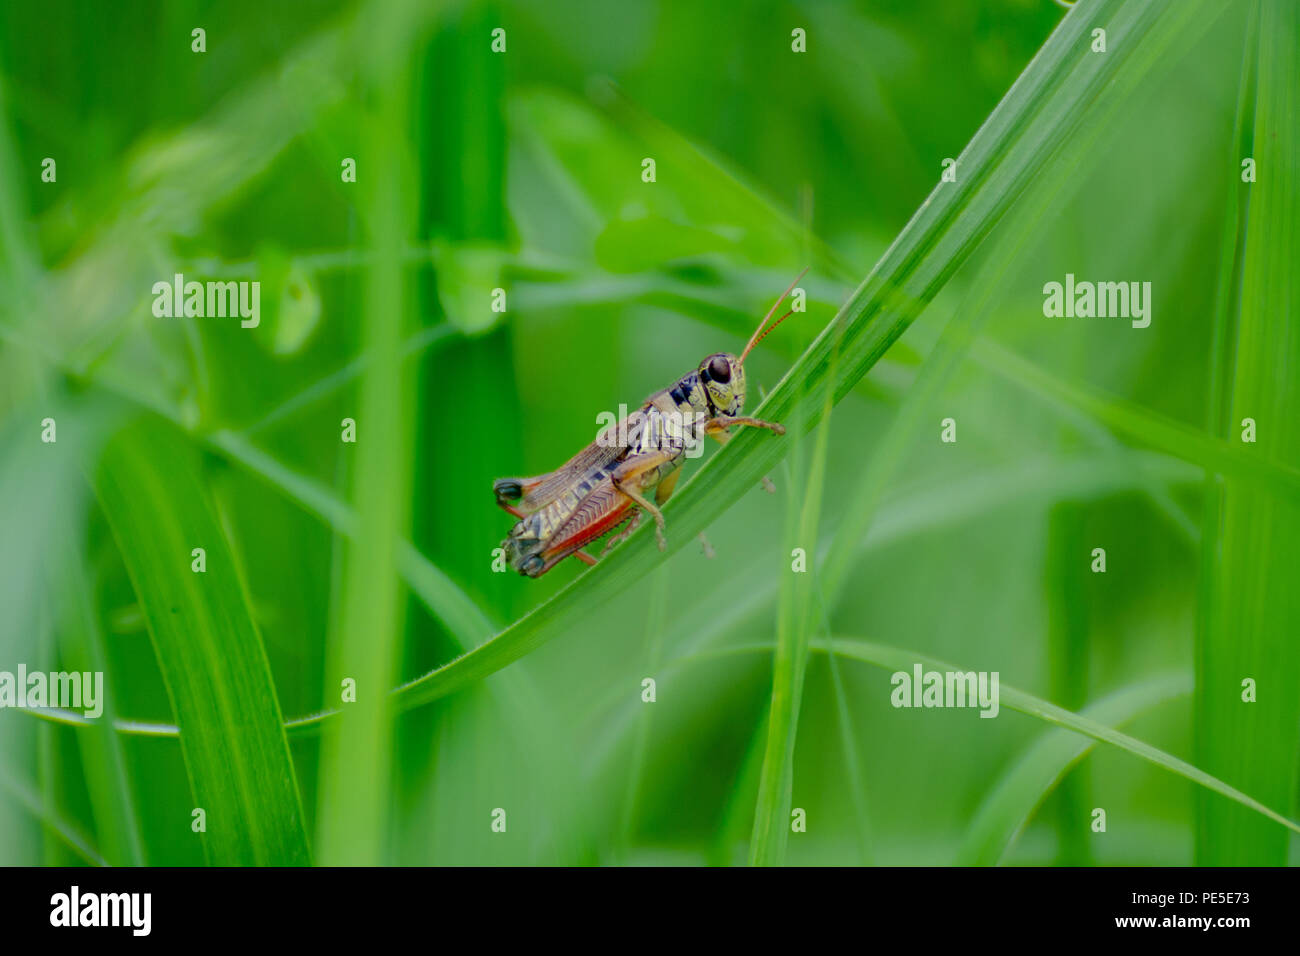 Grasshopper perched on a large blade of green grass in Duck Mountain Provincial Park, Manitoba, Canada Stock Photo